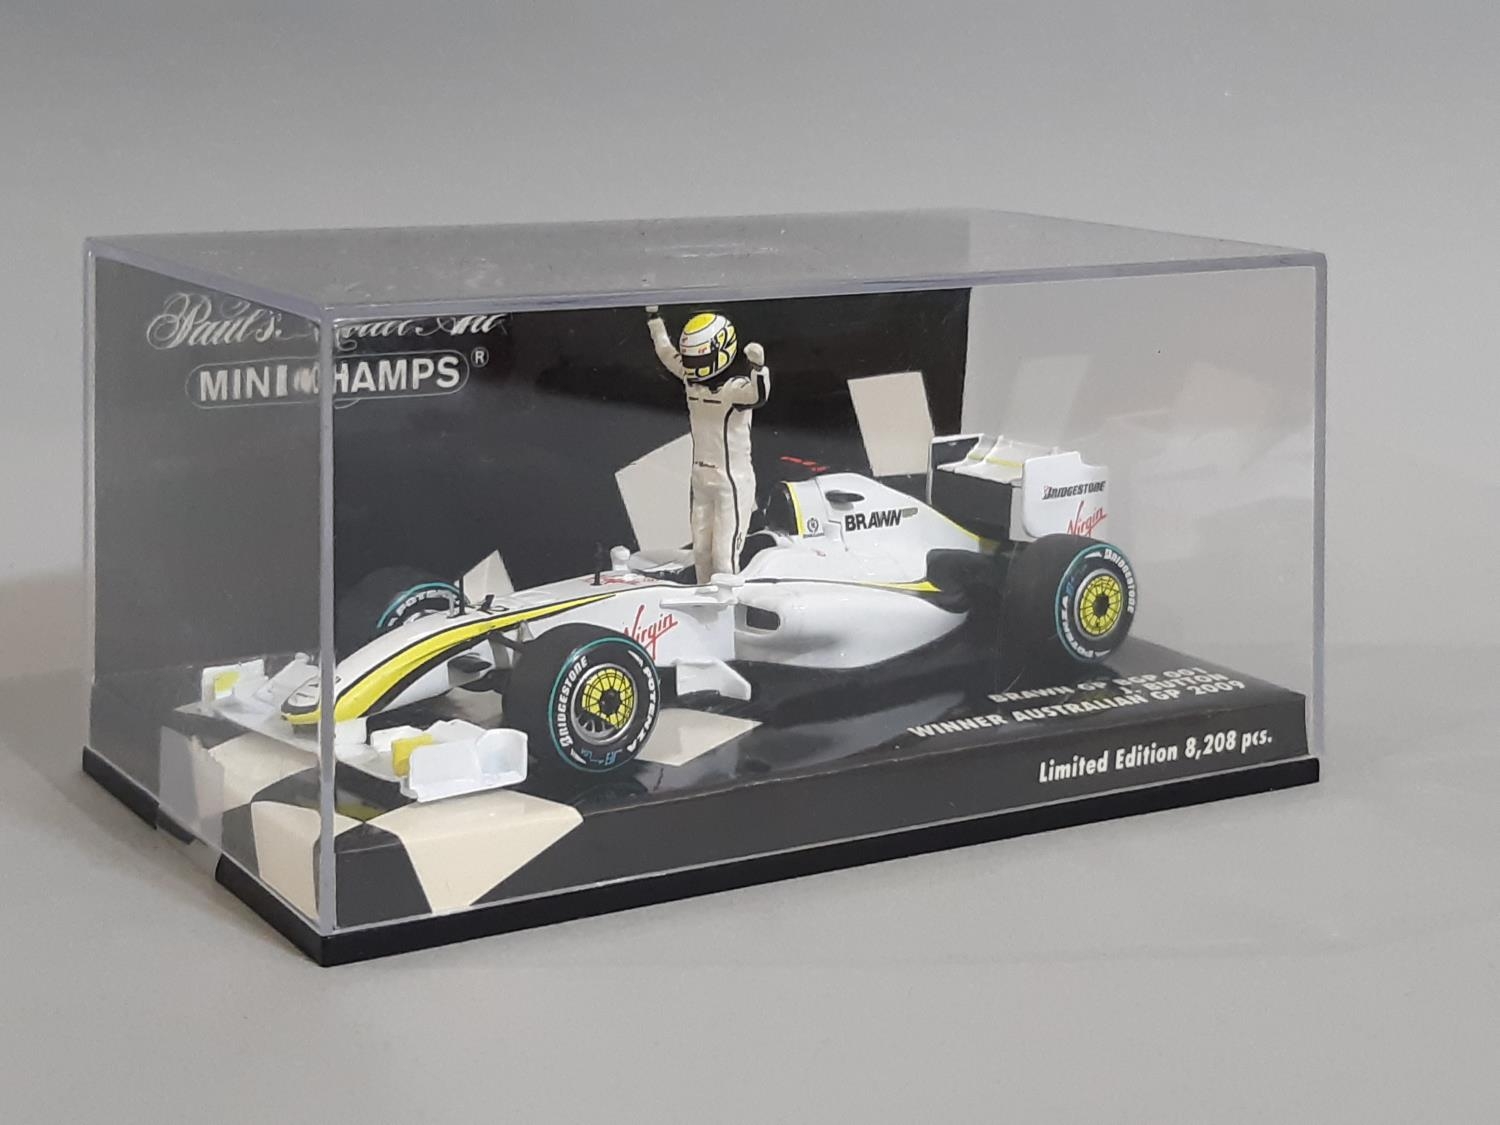 7 cased models of Formula 1 racing cars by Minichamps (Paul's Model Art), all 1:43 scale - Image 2 of 4